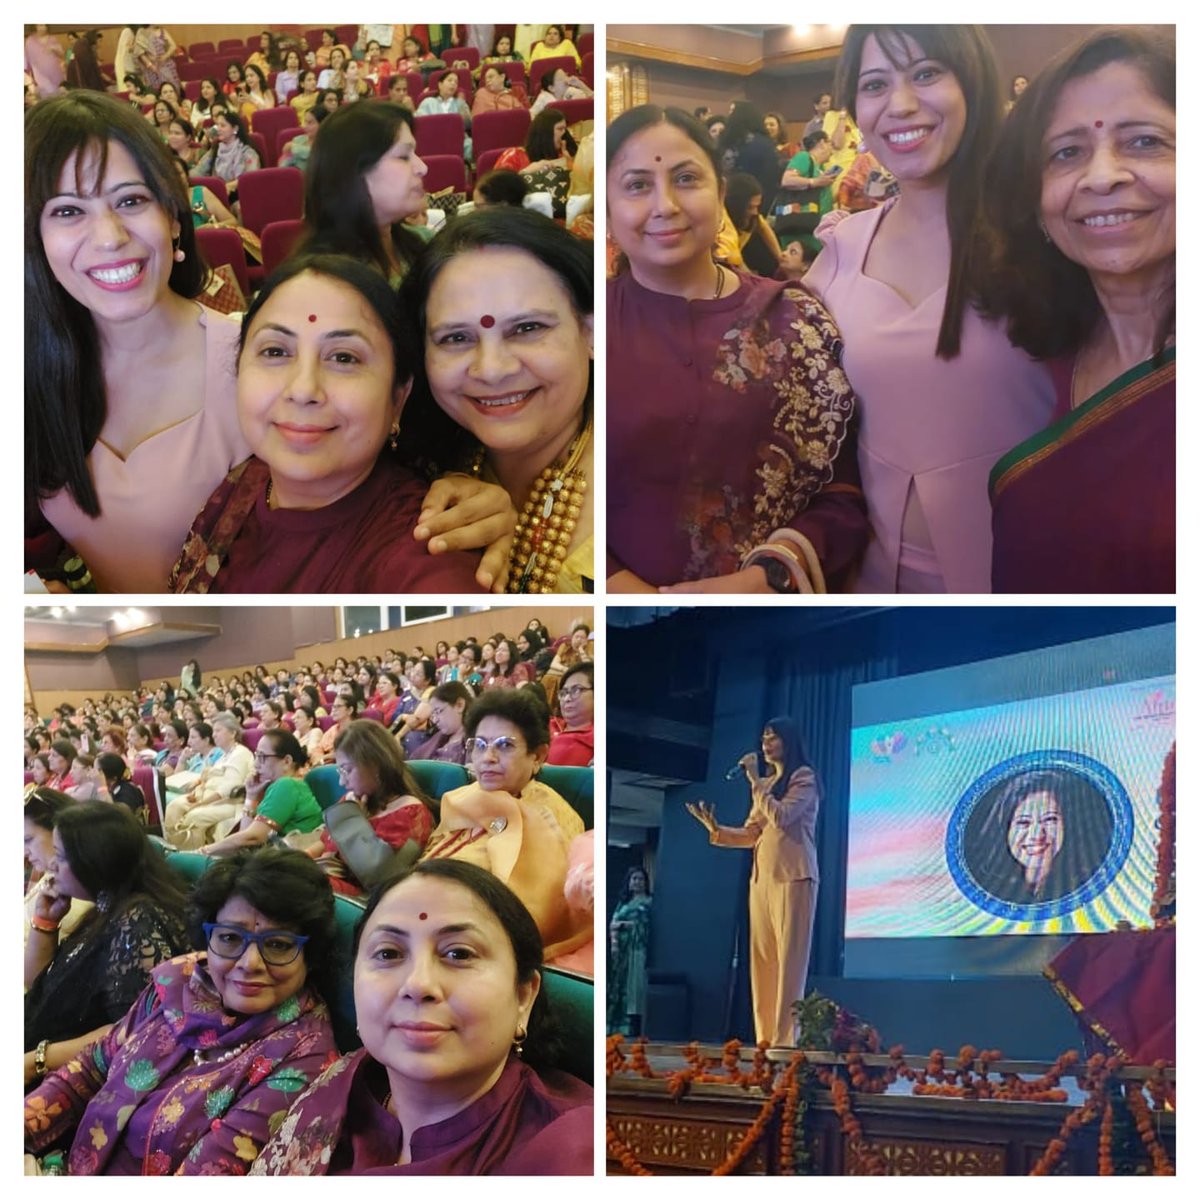 #Awazekhwateen's Director, @RANAND92105699 , was invited to be part of an event hosted by @InnerWheelInt . The focal point of the event centered on gender equality, emphasizing the importance of women standing up for one another and providing mutual support.

#womenforWomen